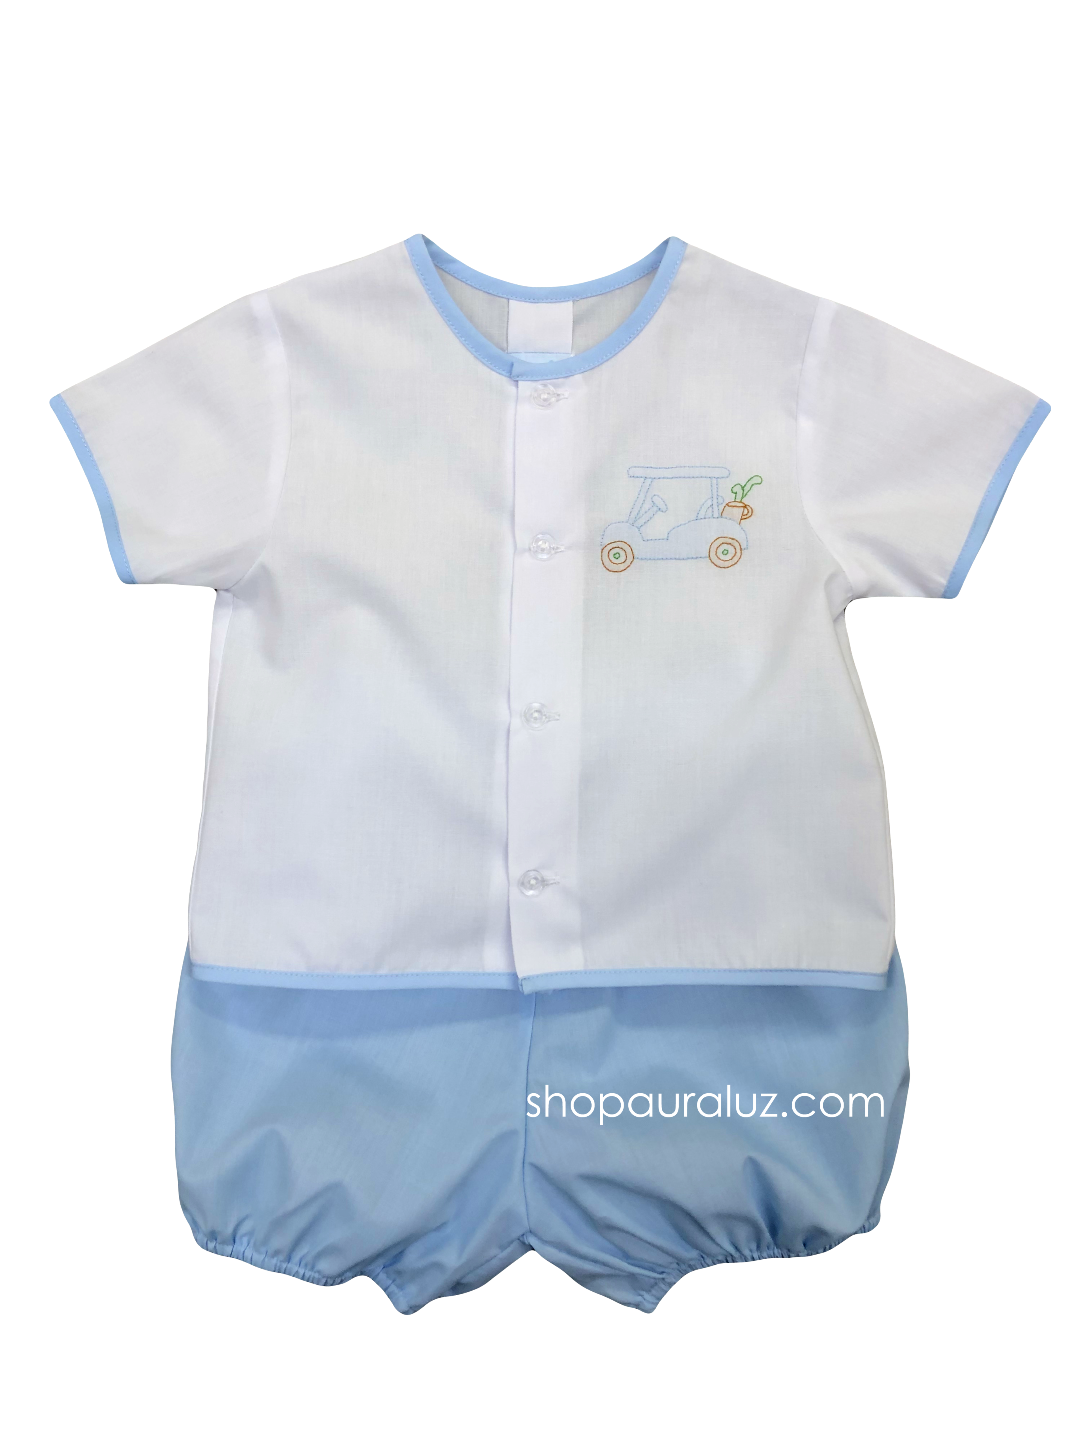 Auraluz 2pc Set...White top with embroidered golf cart and blue bloomer shorts